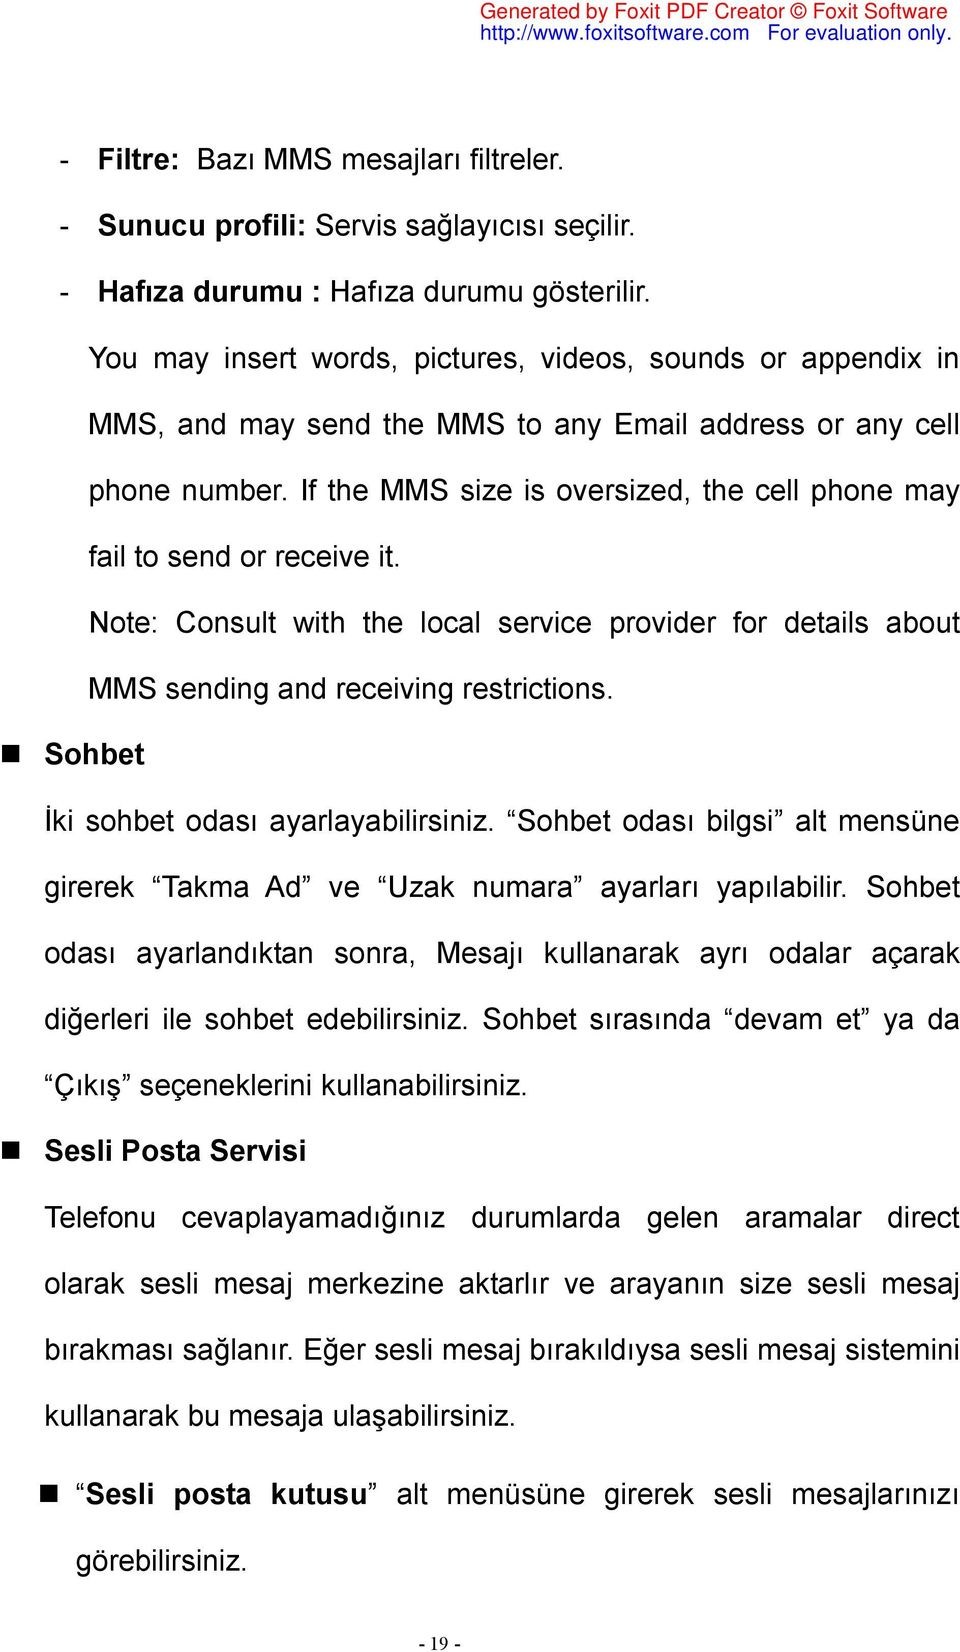 If the MMS size is oversized, the cell phone may fail to send or receive it. Note: Consult with the local service provider for details about MMS sending and receiving restrictions.